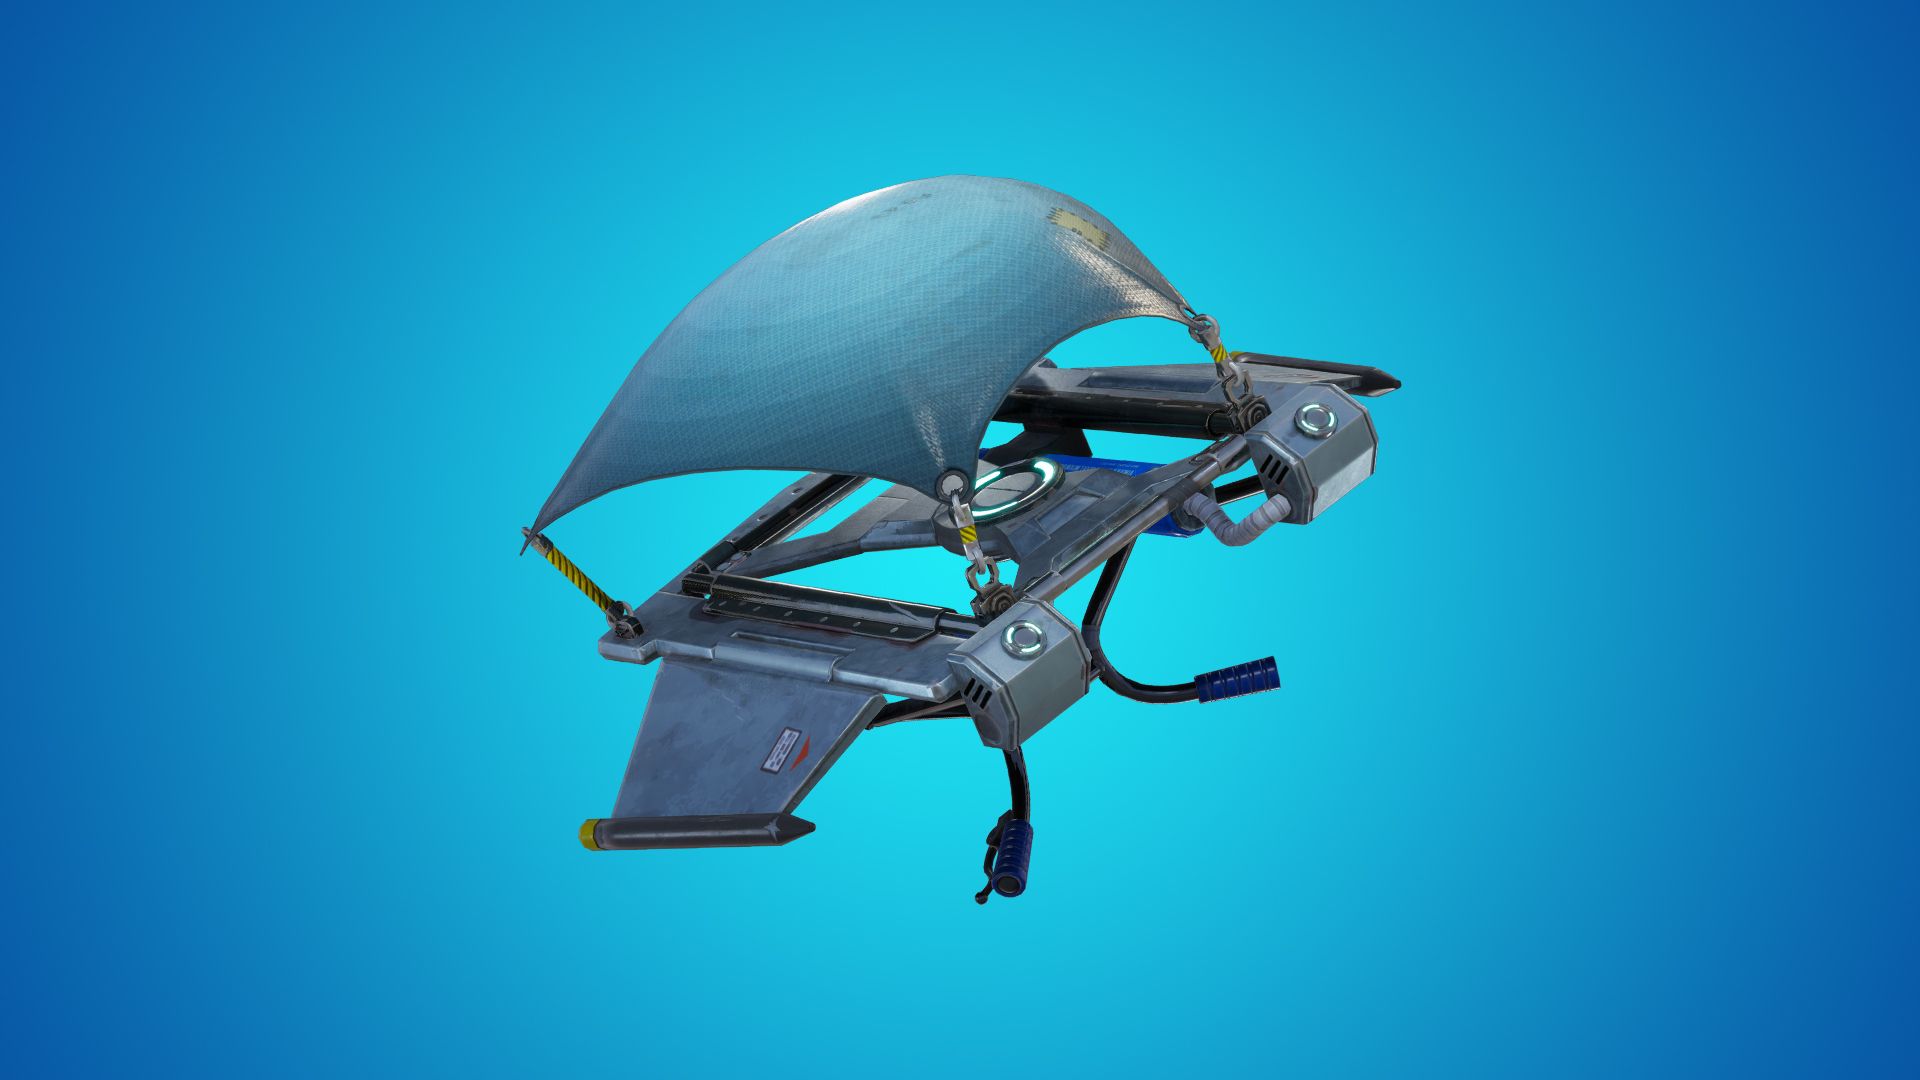 Glider re-deploy will take up an inventory slot in Fortnite v7.20